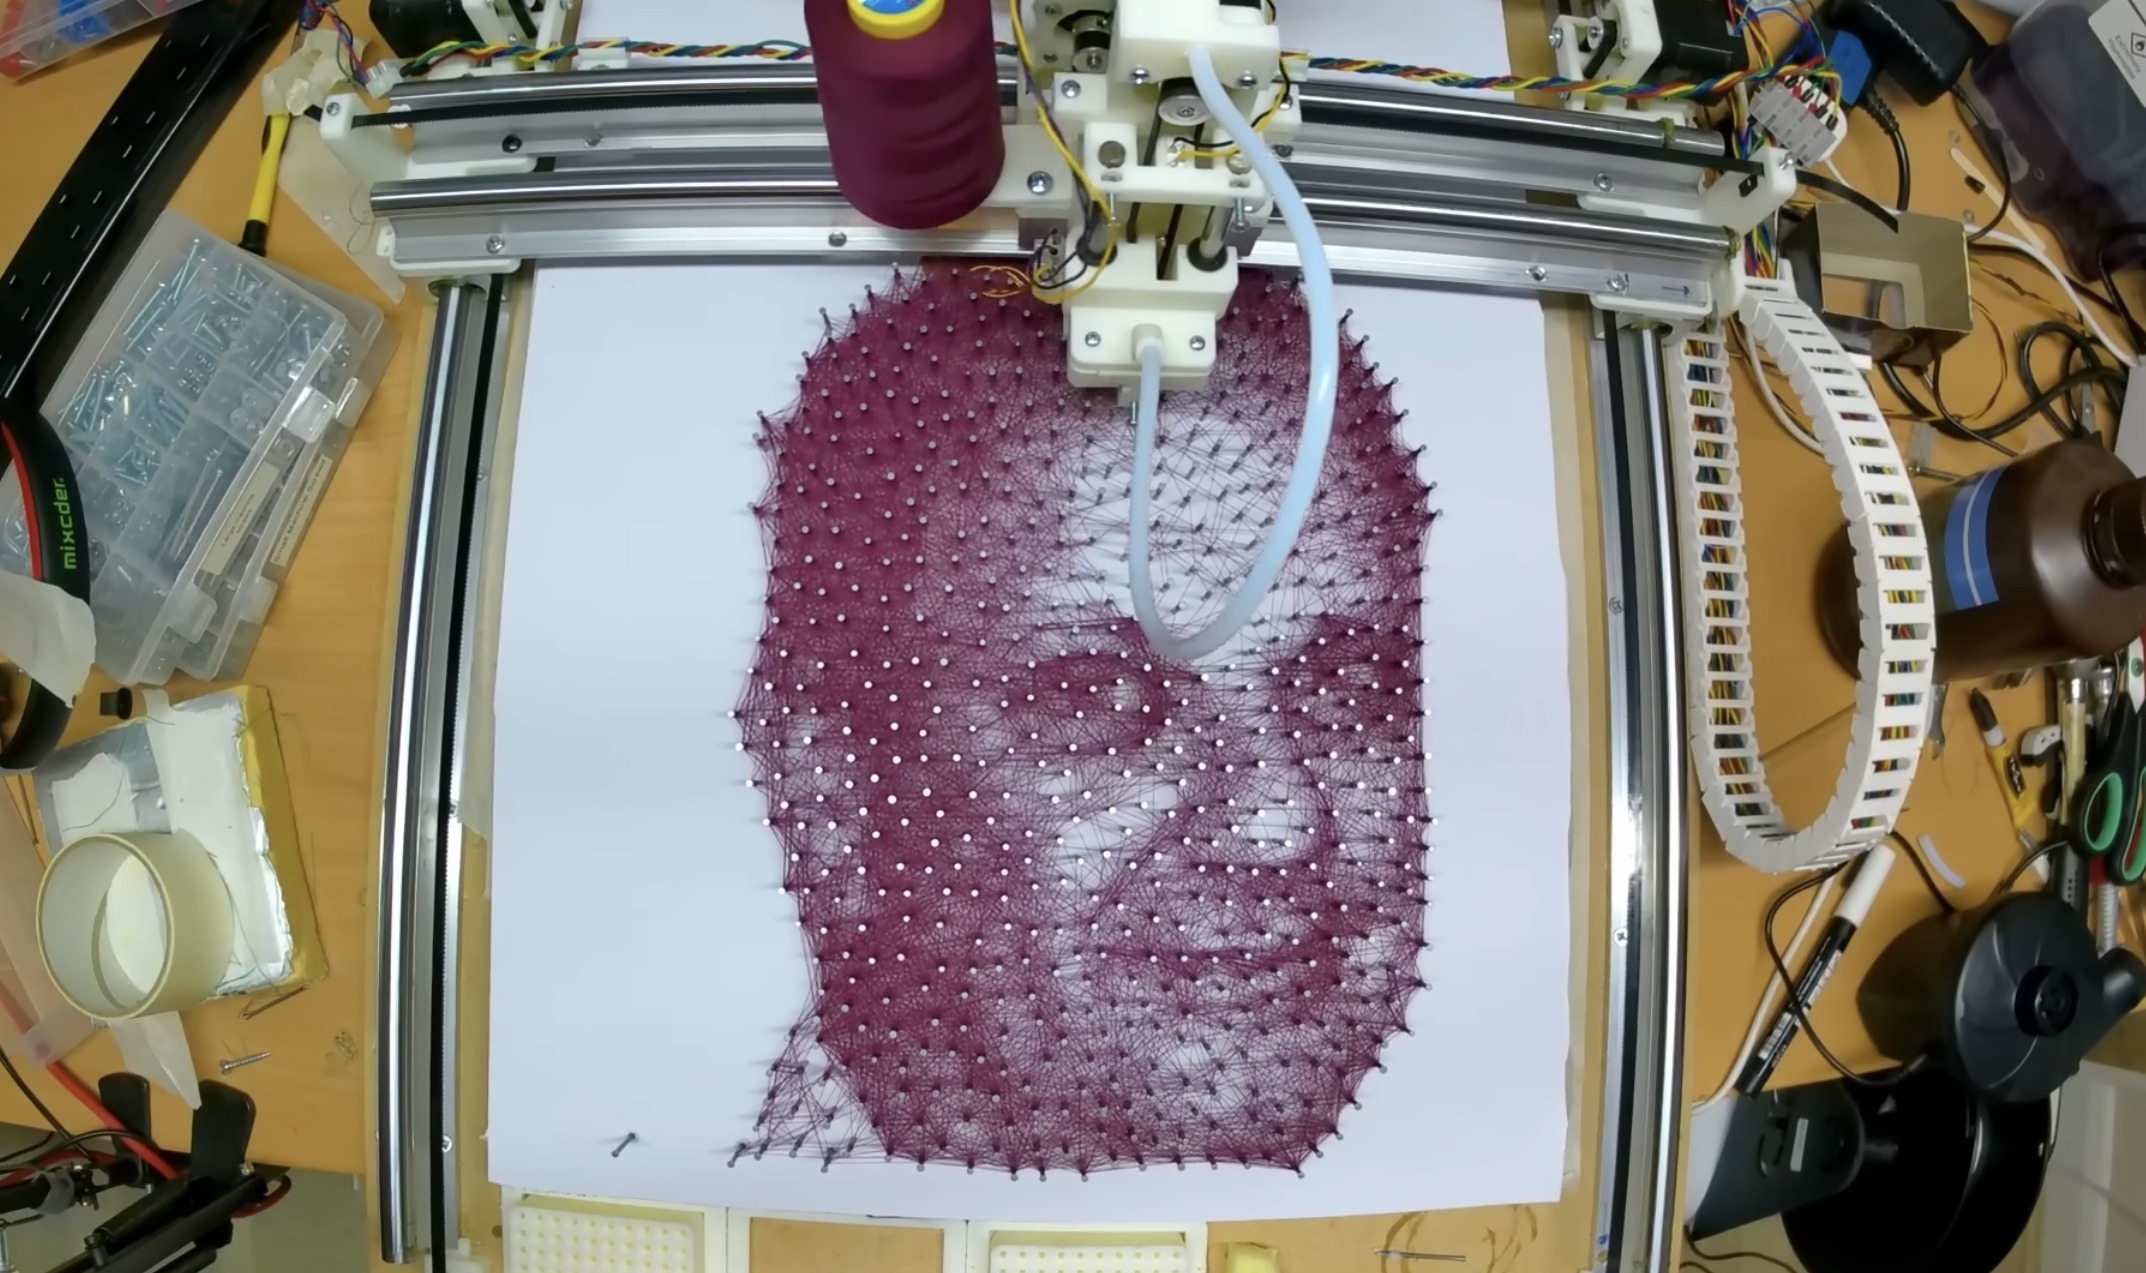 This machine automatically threads beautiful string art